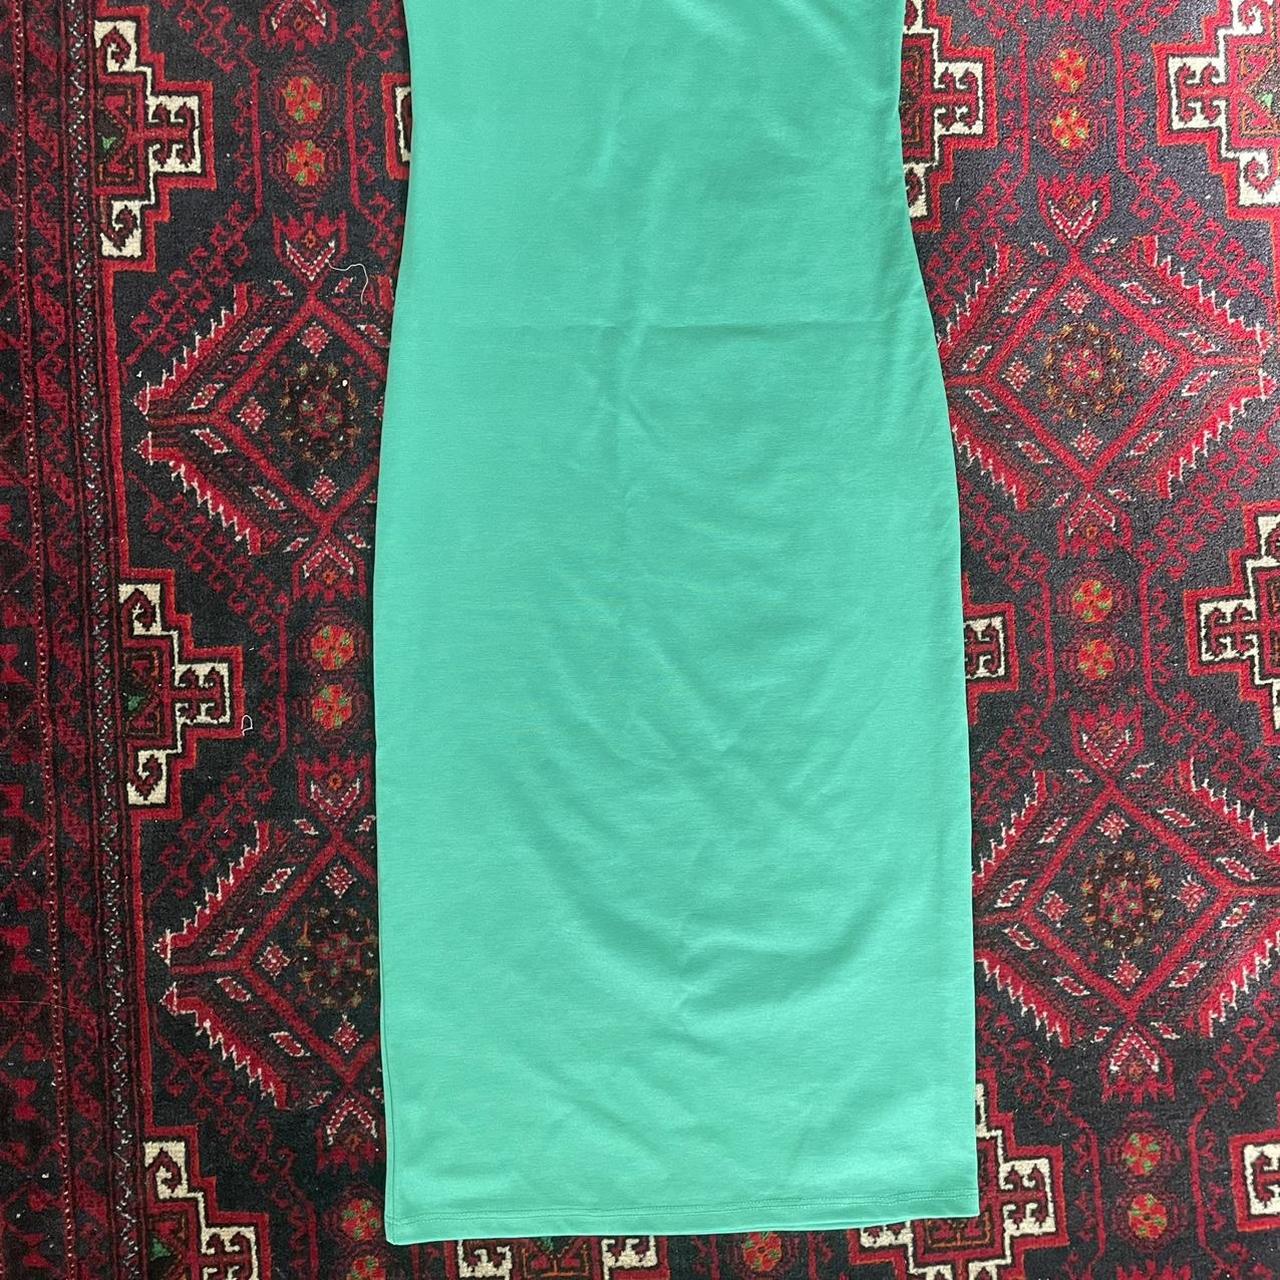 Product Image 2 - The most flattering green bodycon